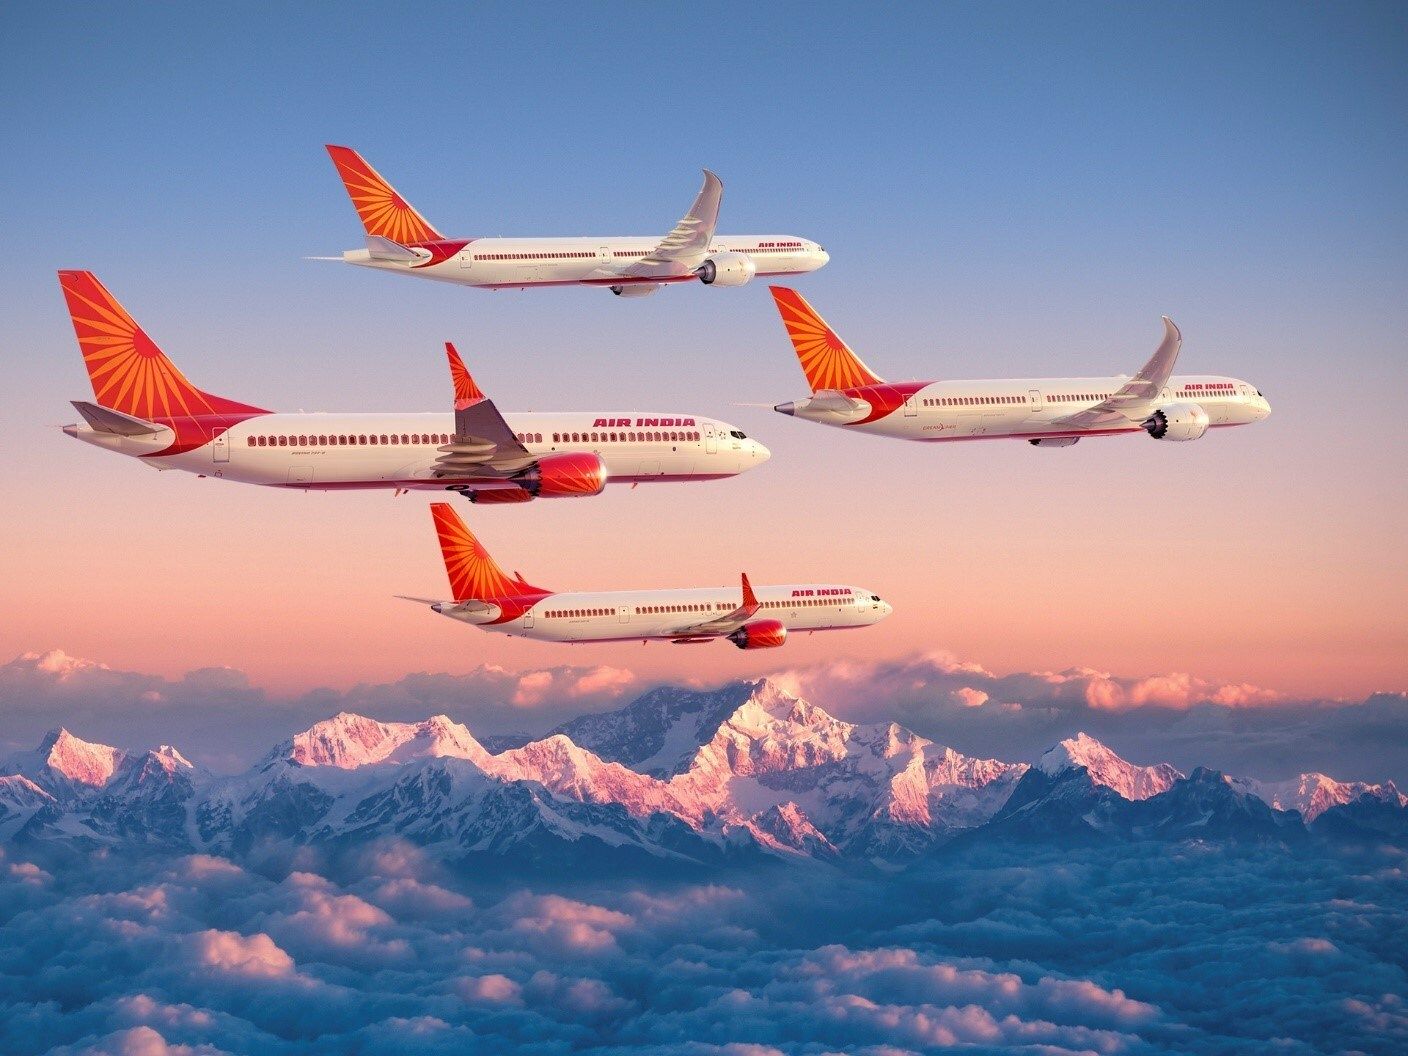 Boeing_and_Air_India Graphic of Boeing Jetliners over Mountains